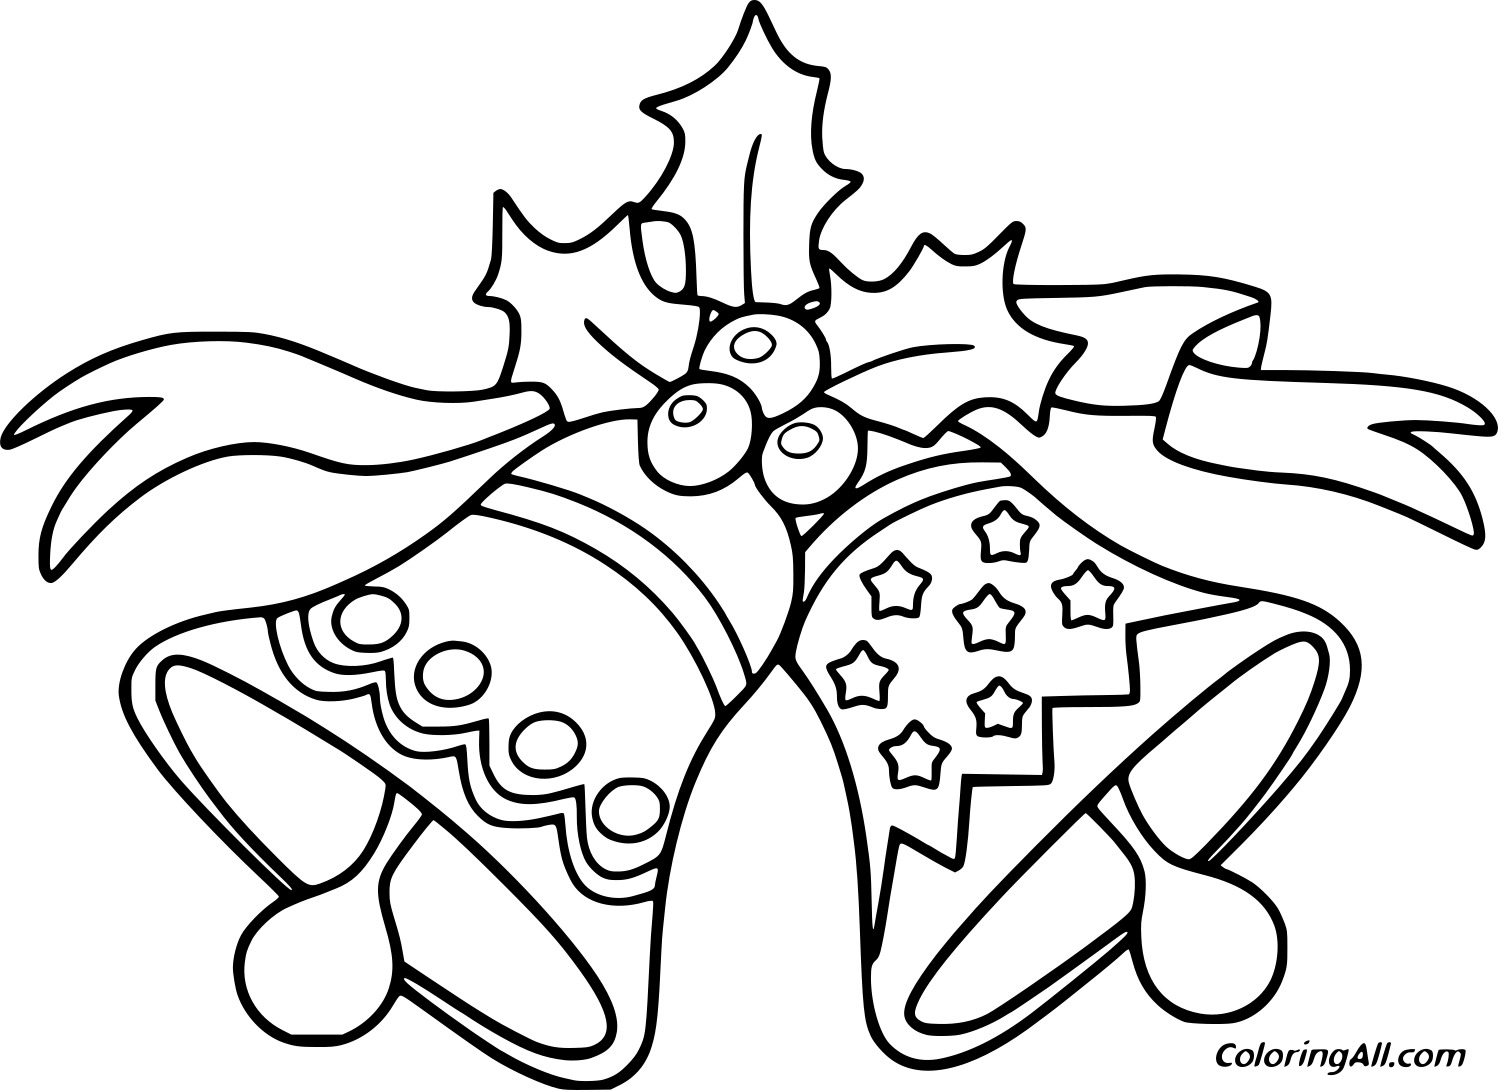 Jingle Bells With Stars Pattern Image For Kids Coloring Page